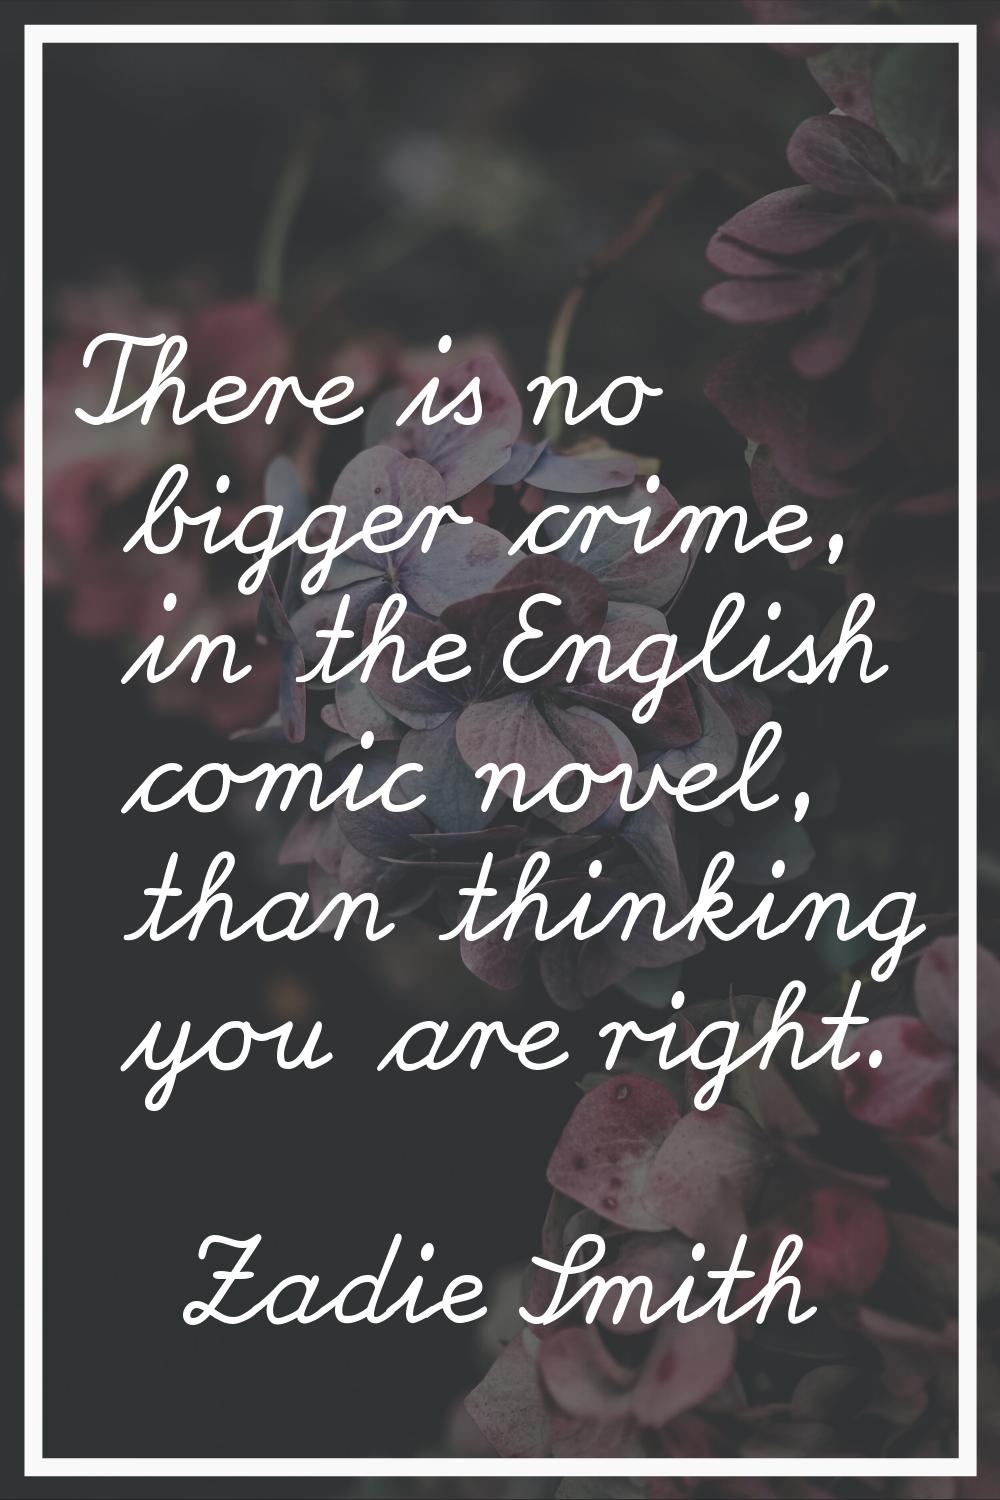 There is no bigger crime, in the English comic novel, than thinking you are right.